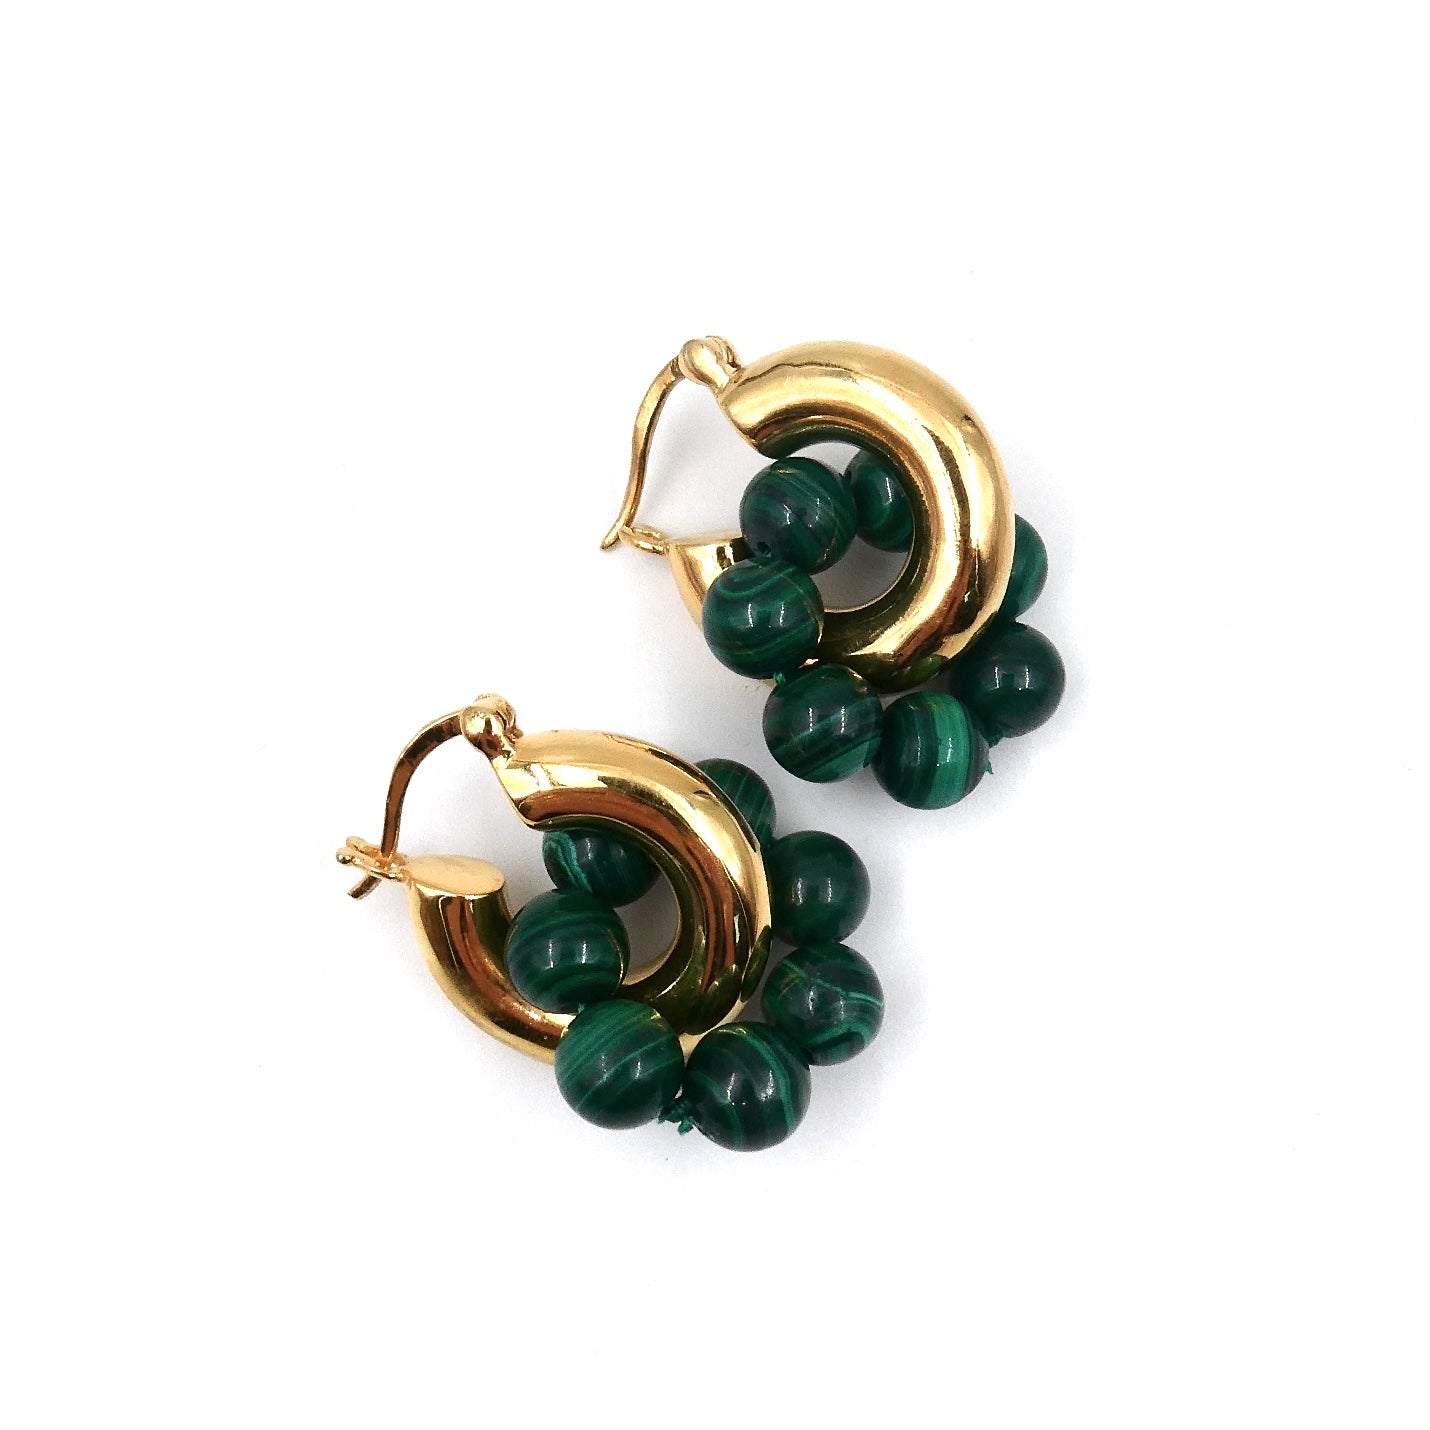 Shyla Sura Hoops with Malachite. - Collected